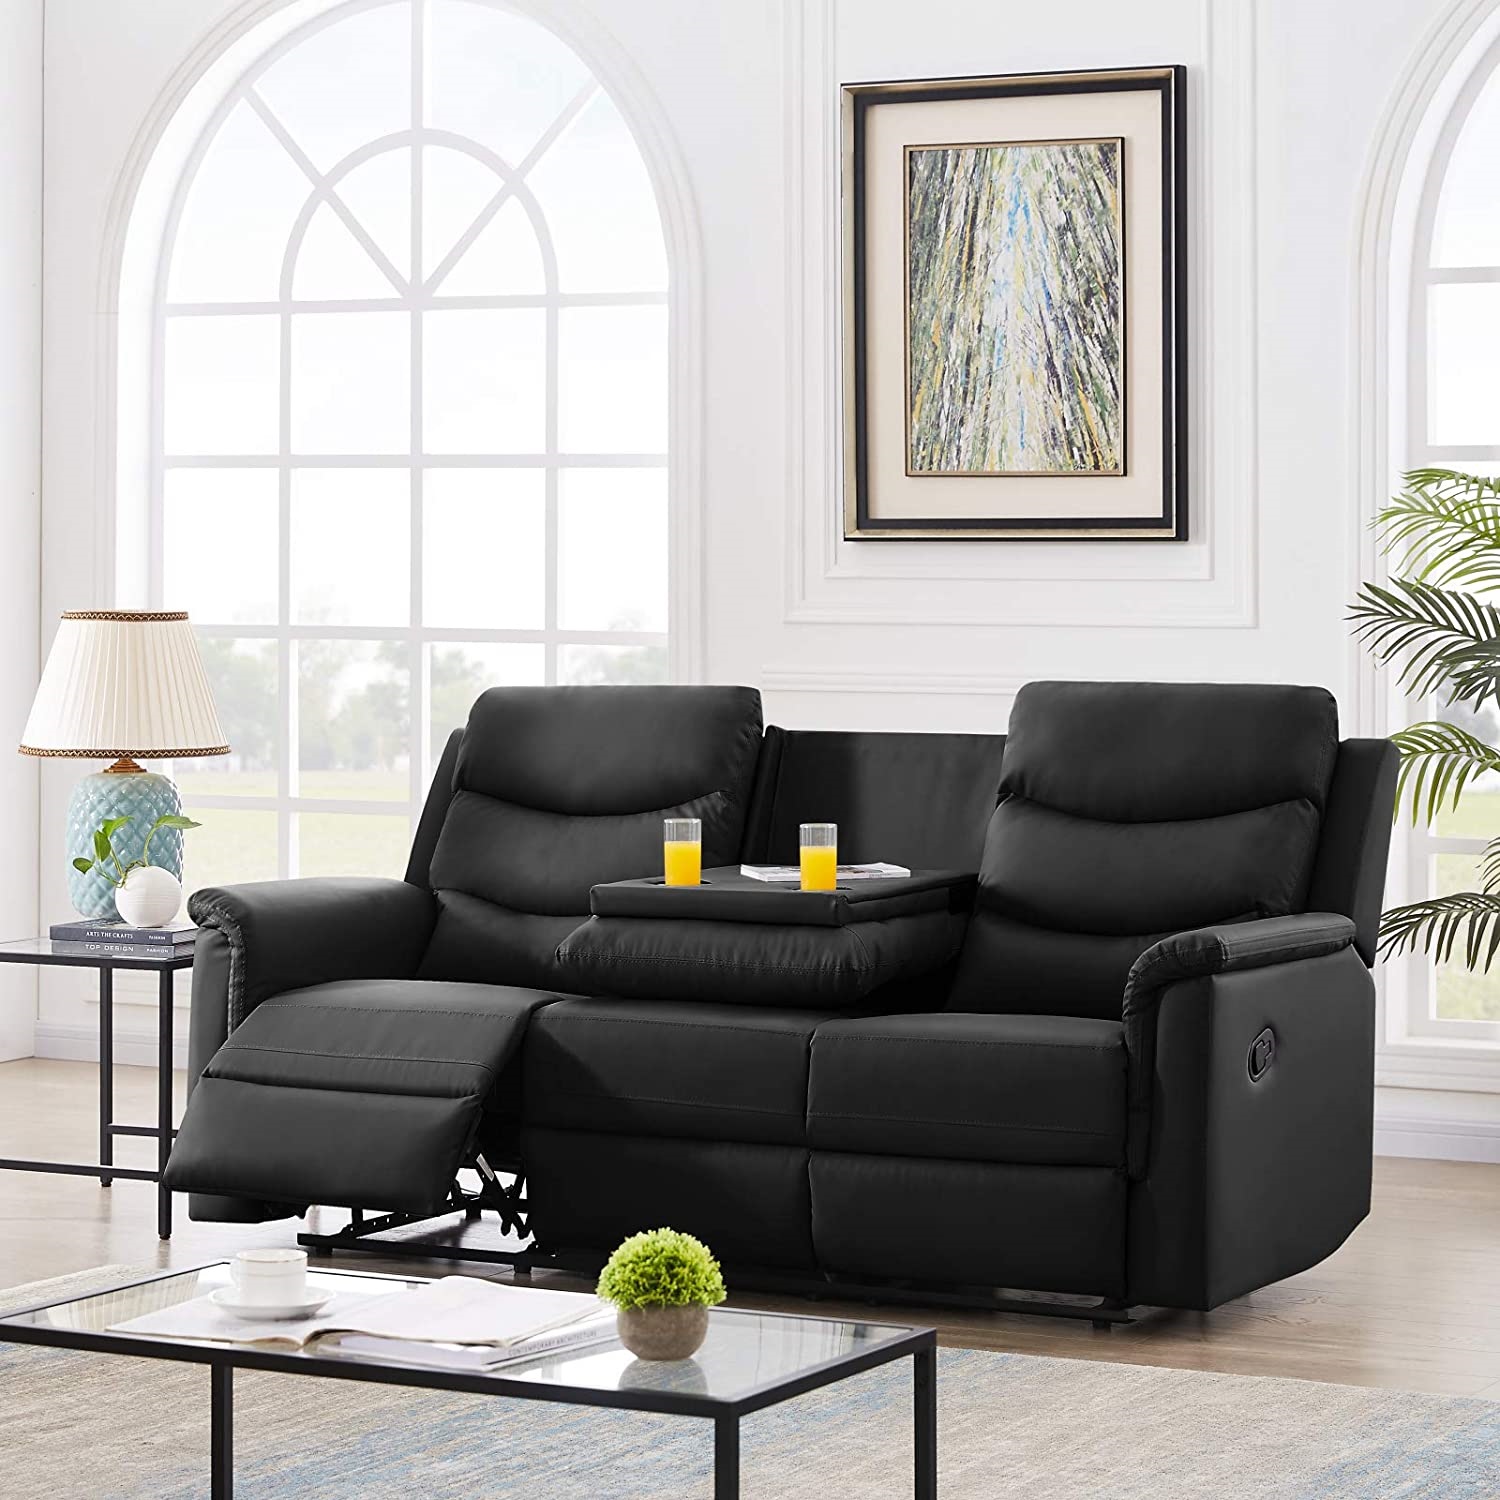 Pannow Double Recliner Loveseat 3 pc